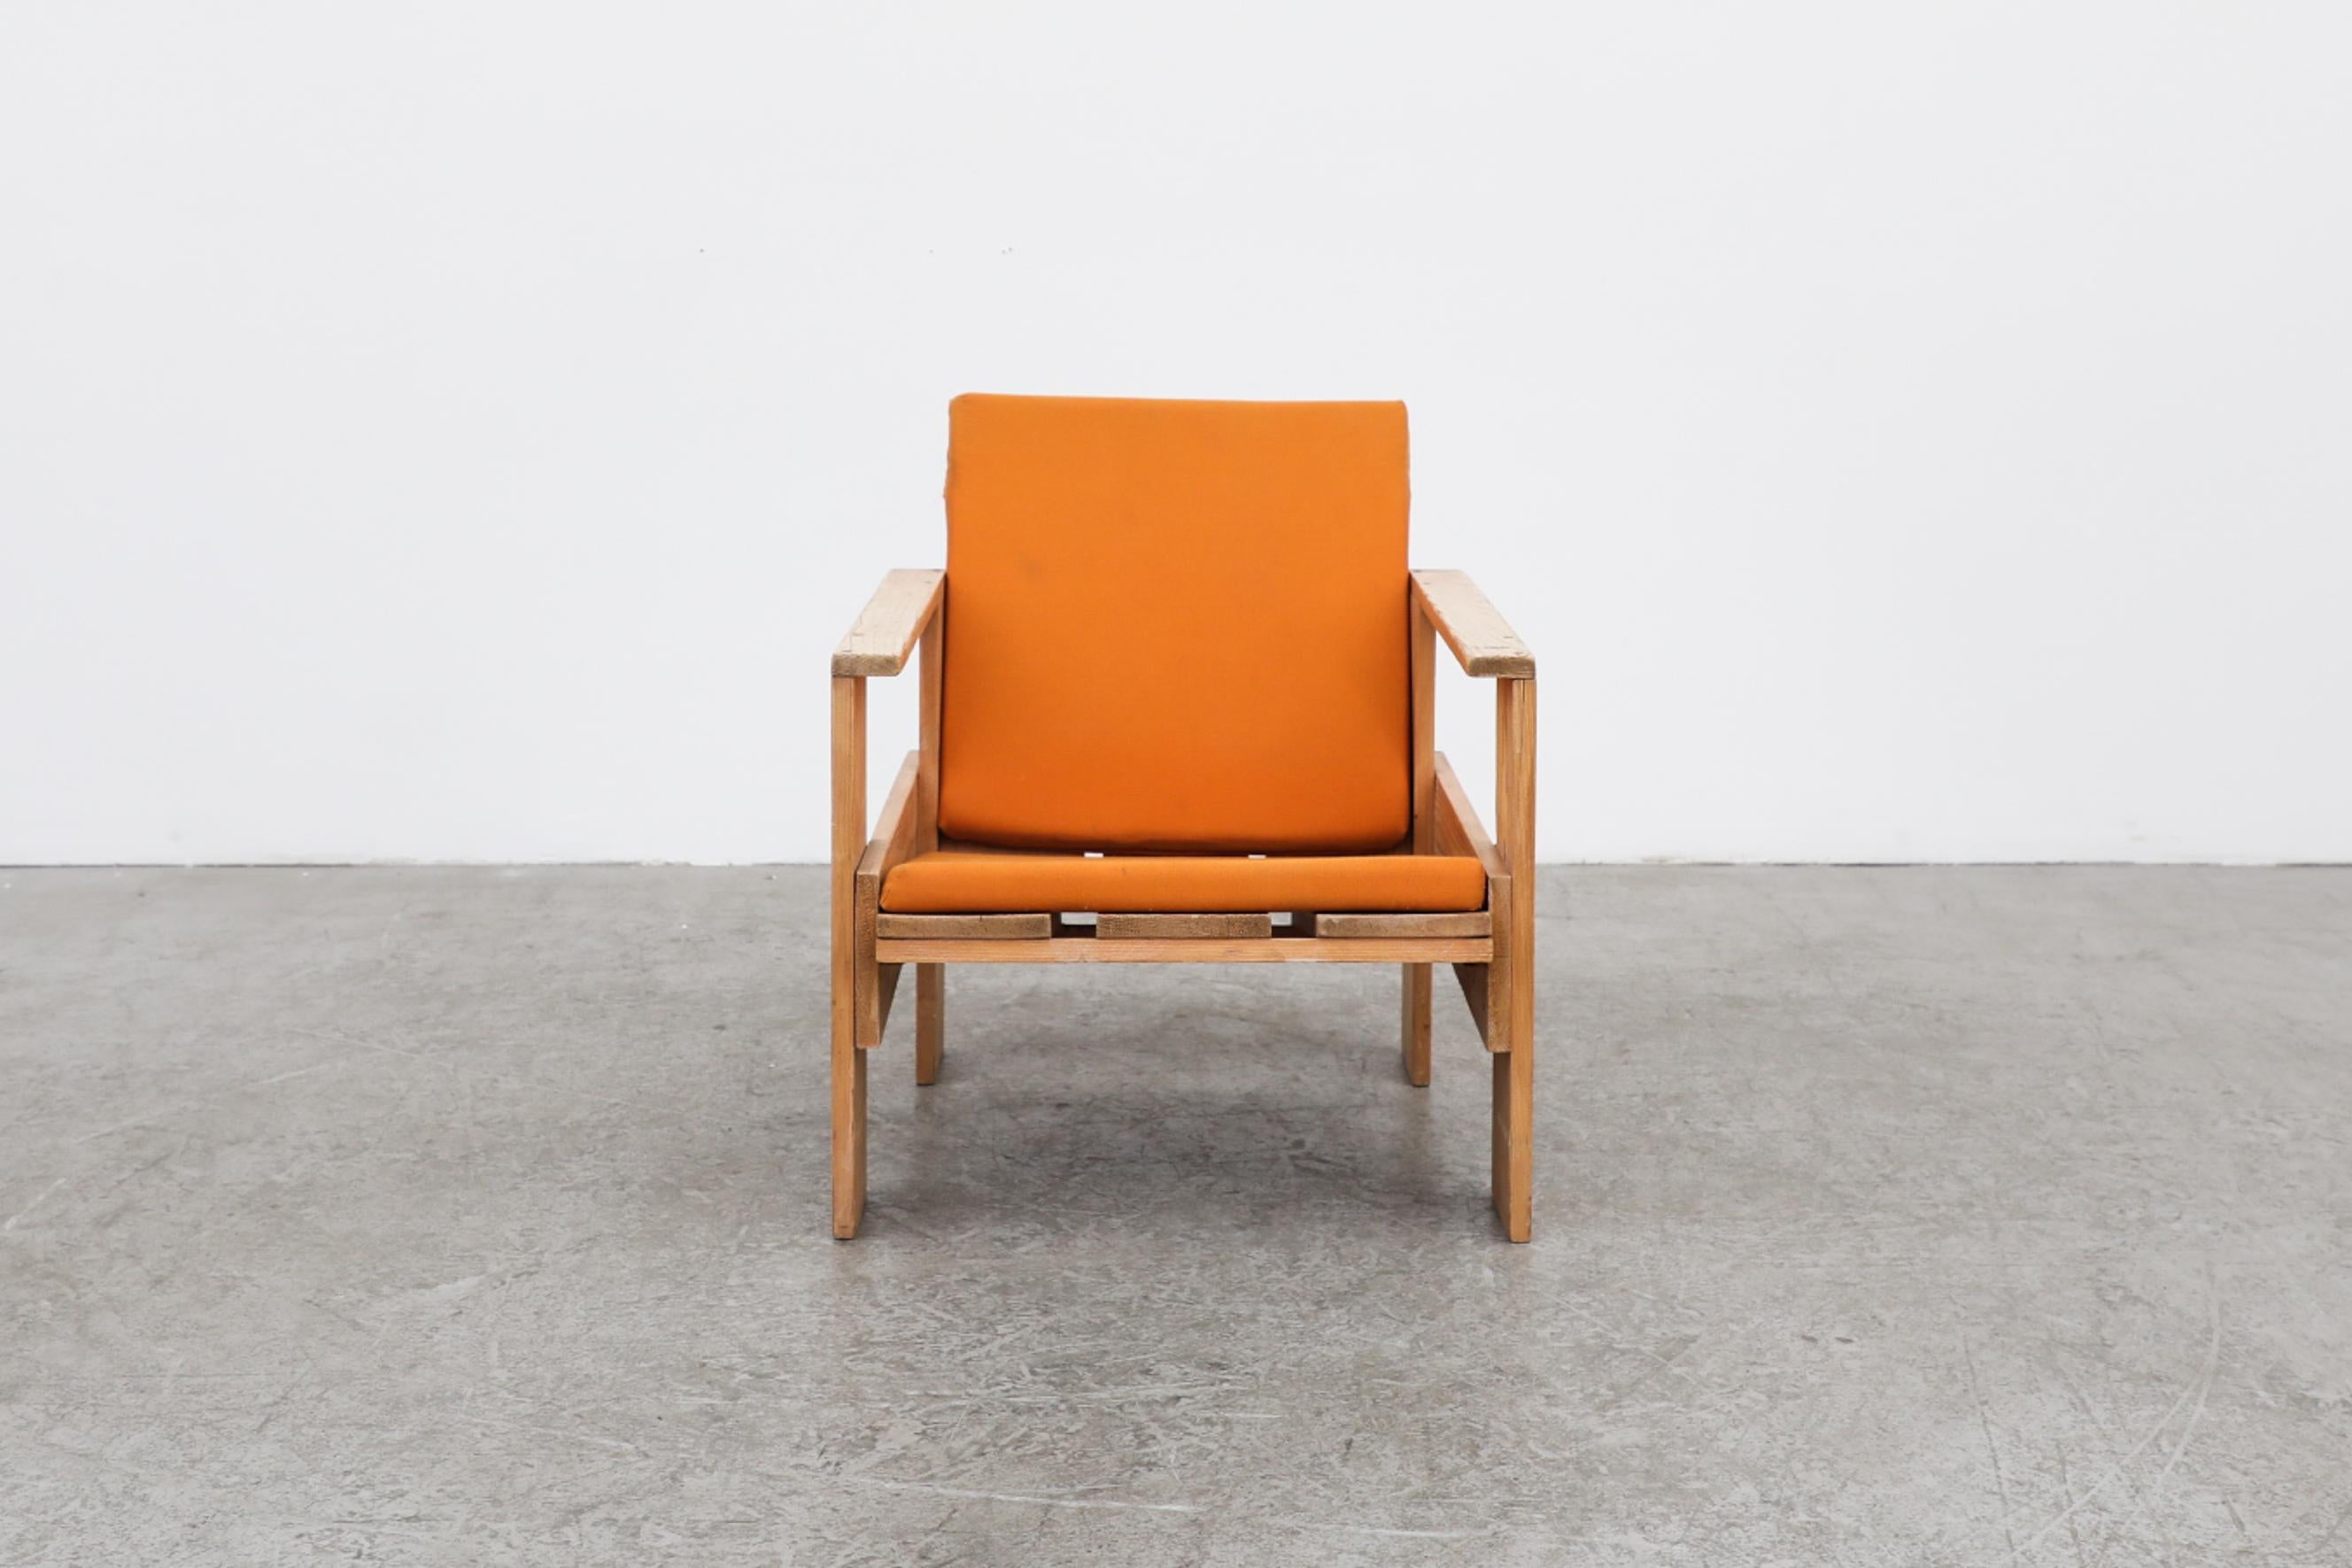 Unique Gerrit Rietveld style plywood crate chair in original condition. Designed in the 1934 to produce affordable furniture for the masses utilizing the abundance of wooden transportation crates. This lounge chair is an iconic and collectible